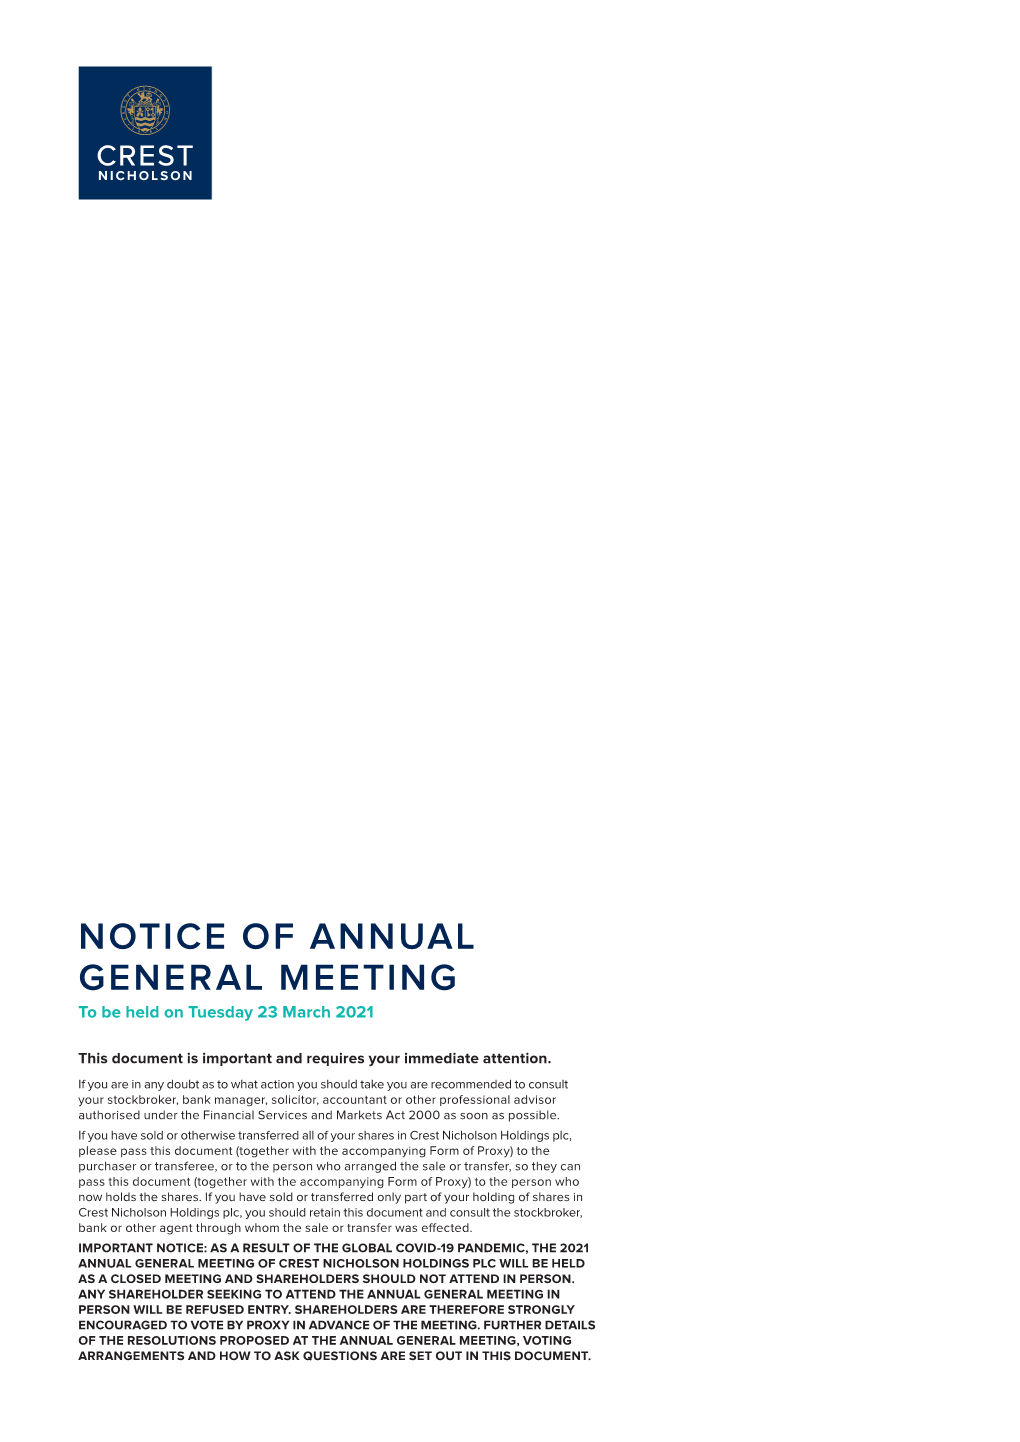 NOTICE of ANNUAL GENERAL MEETING to Be Held on Tuesday 23 March 2021